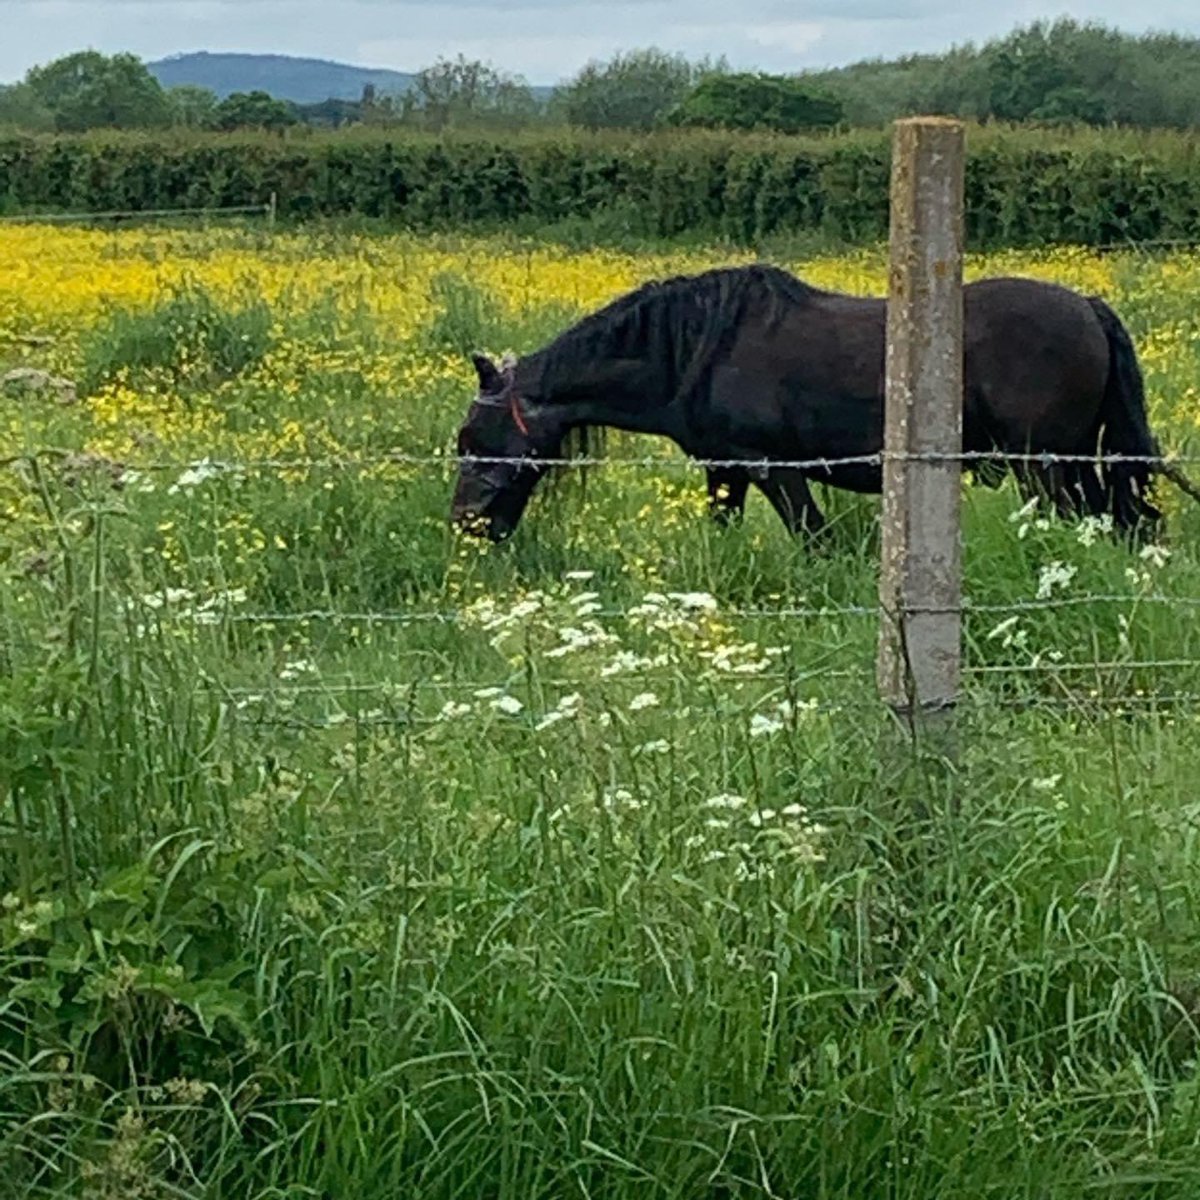 @BHS_UK this is the last photo I took of my beloved Fell pony. I was cycling to see him and stopped because he looked so beautiful. On 19th April he told me it was his time and he told me where. He passed peacefully but my heart broke #HorseHumanBond #fellpony #truelove